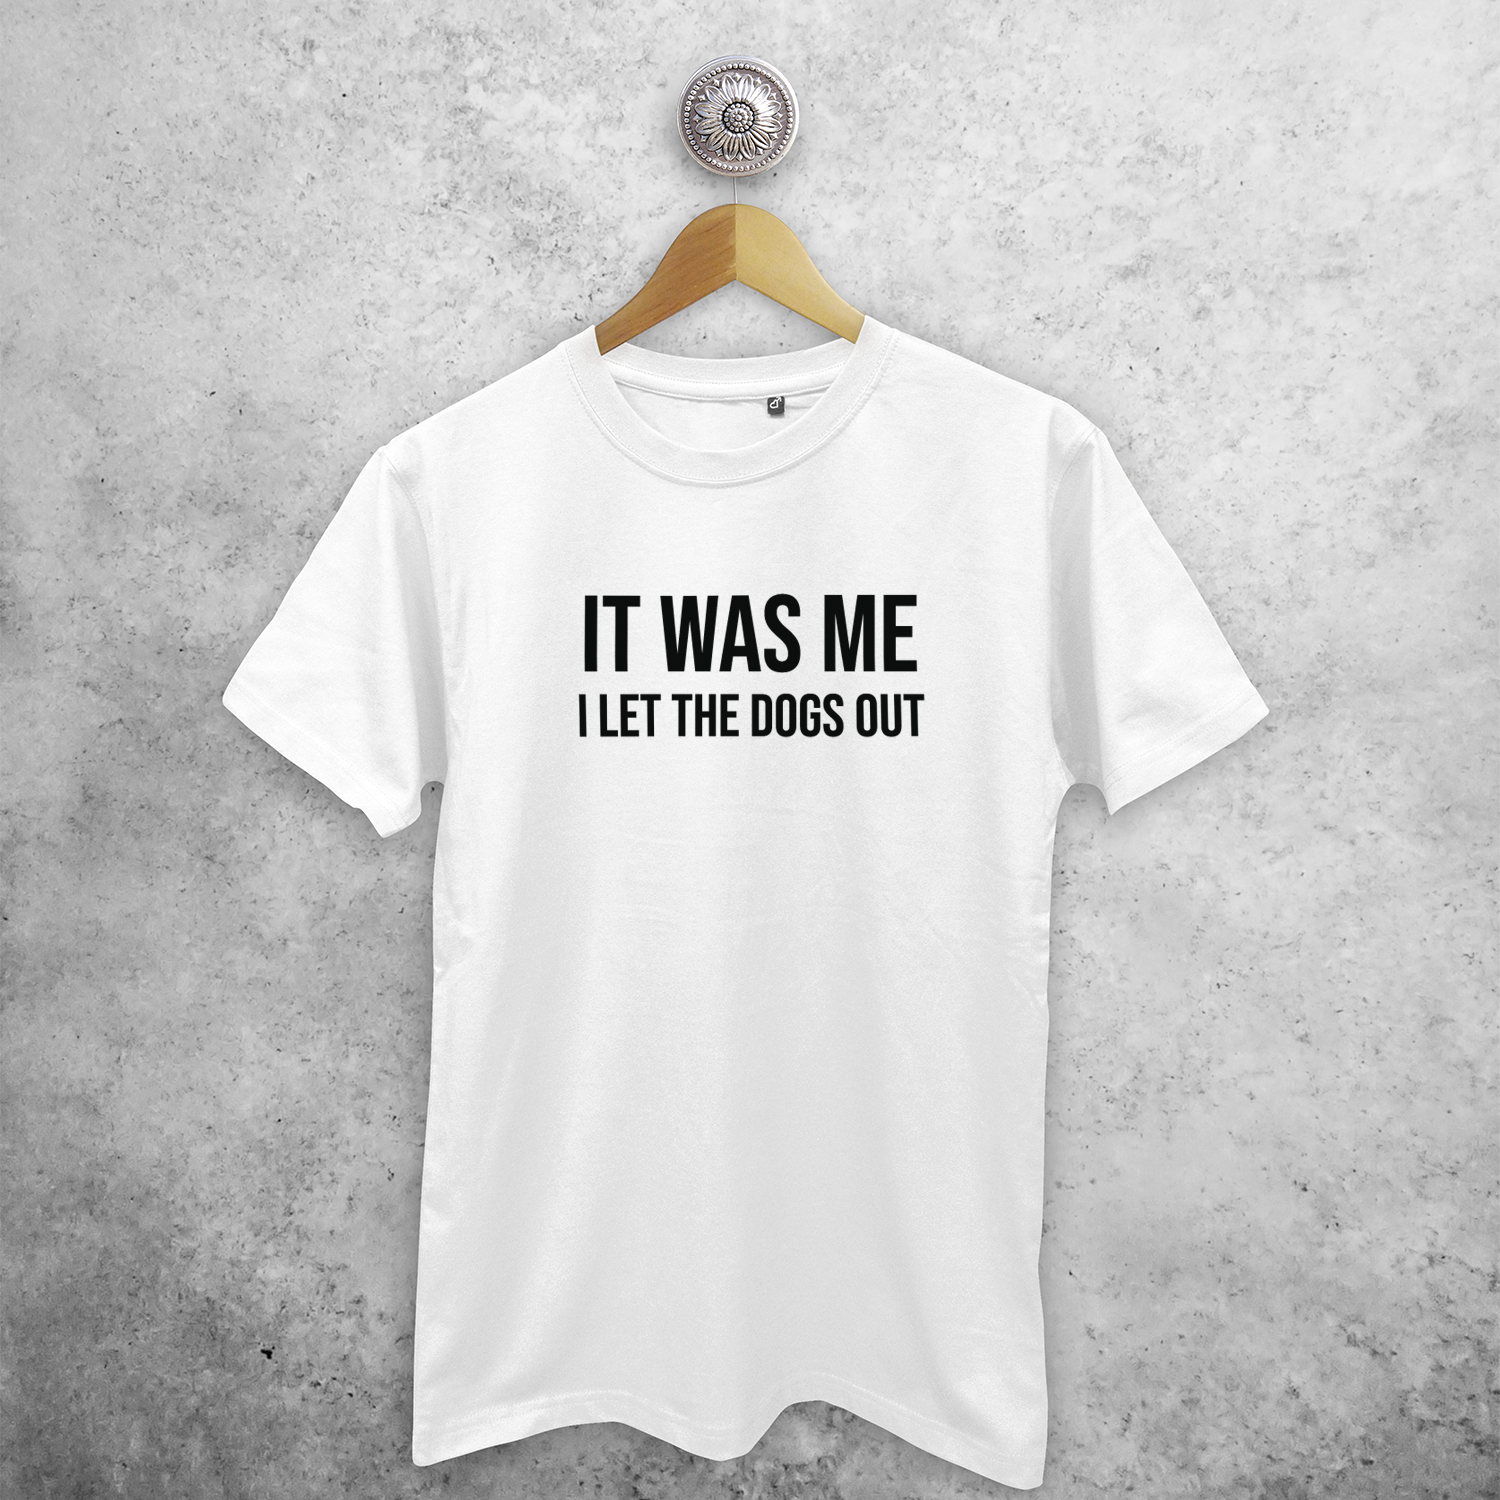 'It was me - I let the dogs out' adult shirt